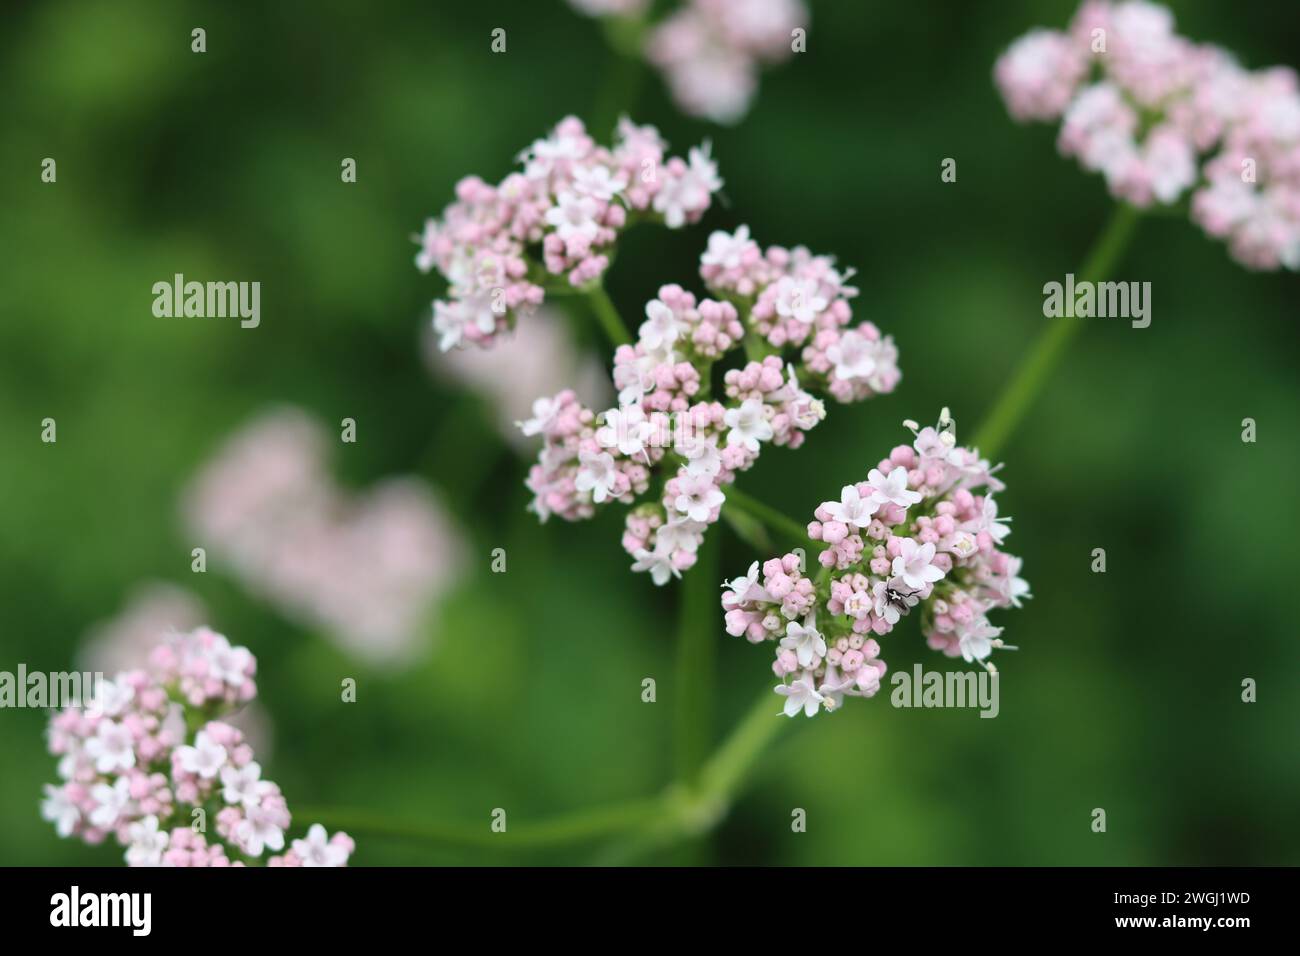 Close up of delicate white and pink valerian flowers Stock Photo